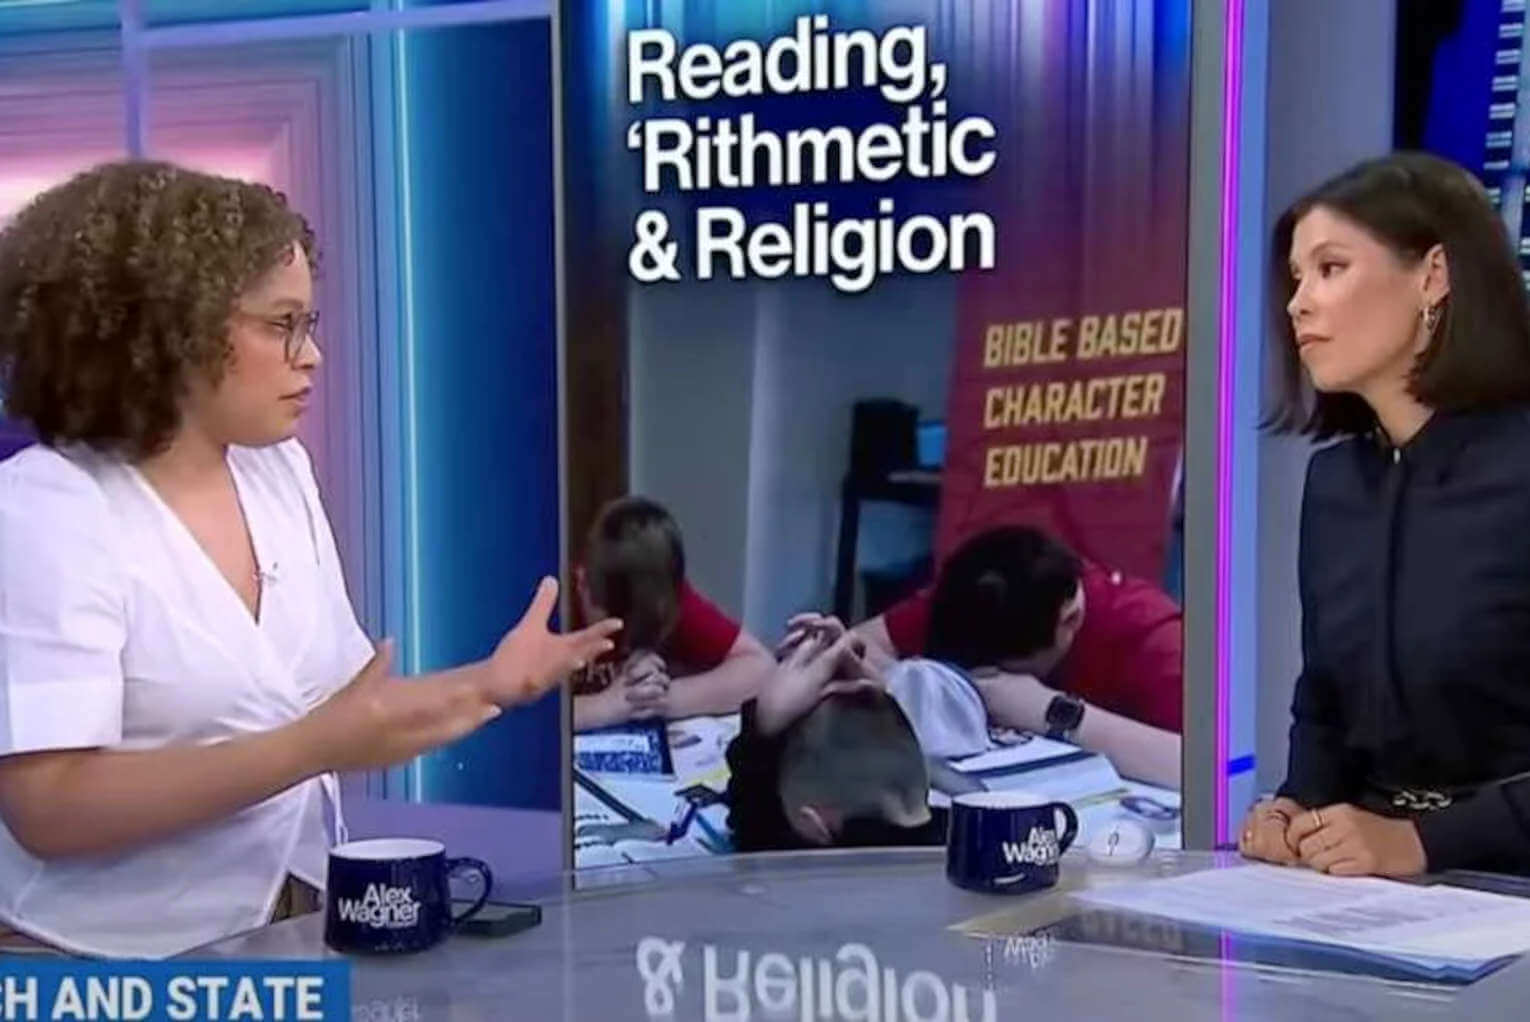 MSNBC’s Bizarre Treatment of Bible Ministry Sparks Shock: ‘Like a ‘Saturday Night Live’ Sketch’